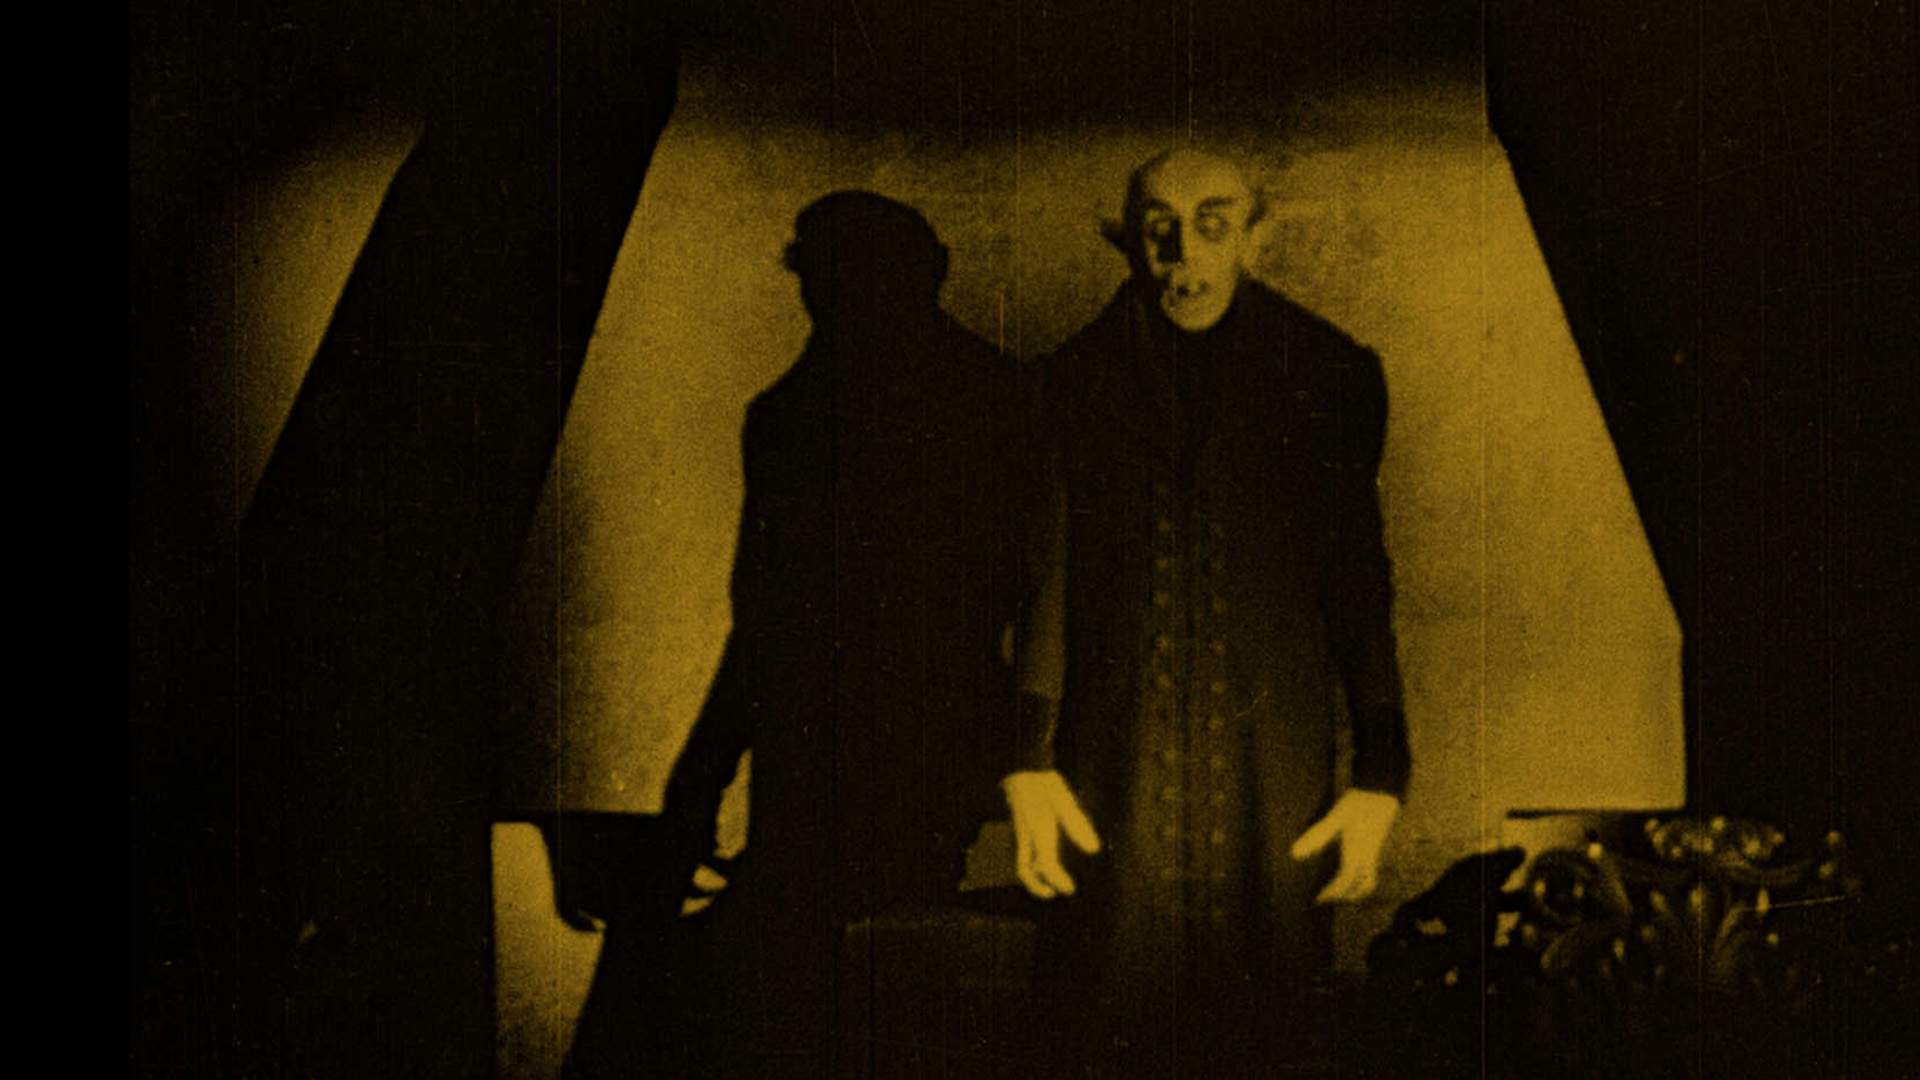 Two Turntables and a Title Card: 'Nosferatu'